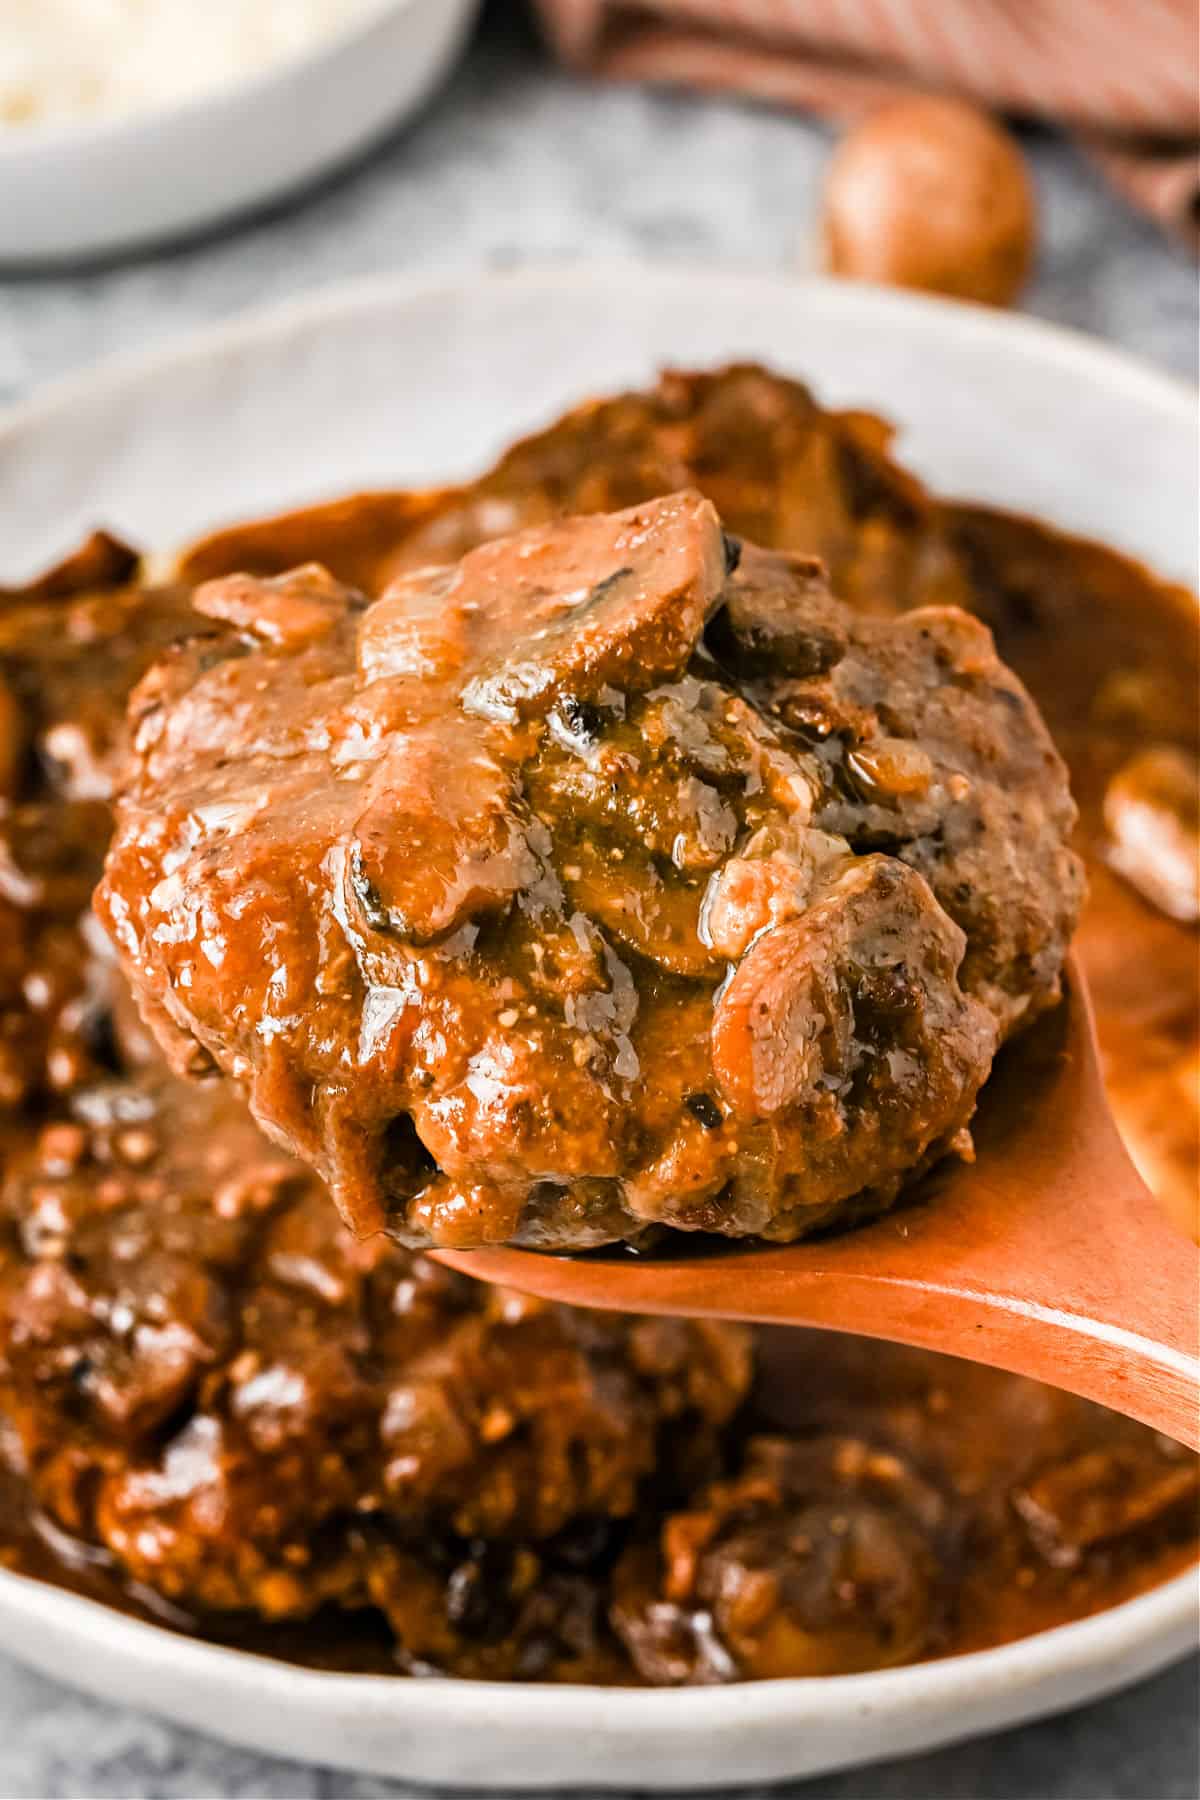 Salisbury steak with mushroom gravy in white bowl with wooden spoon to serve.